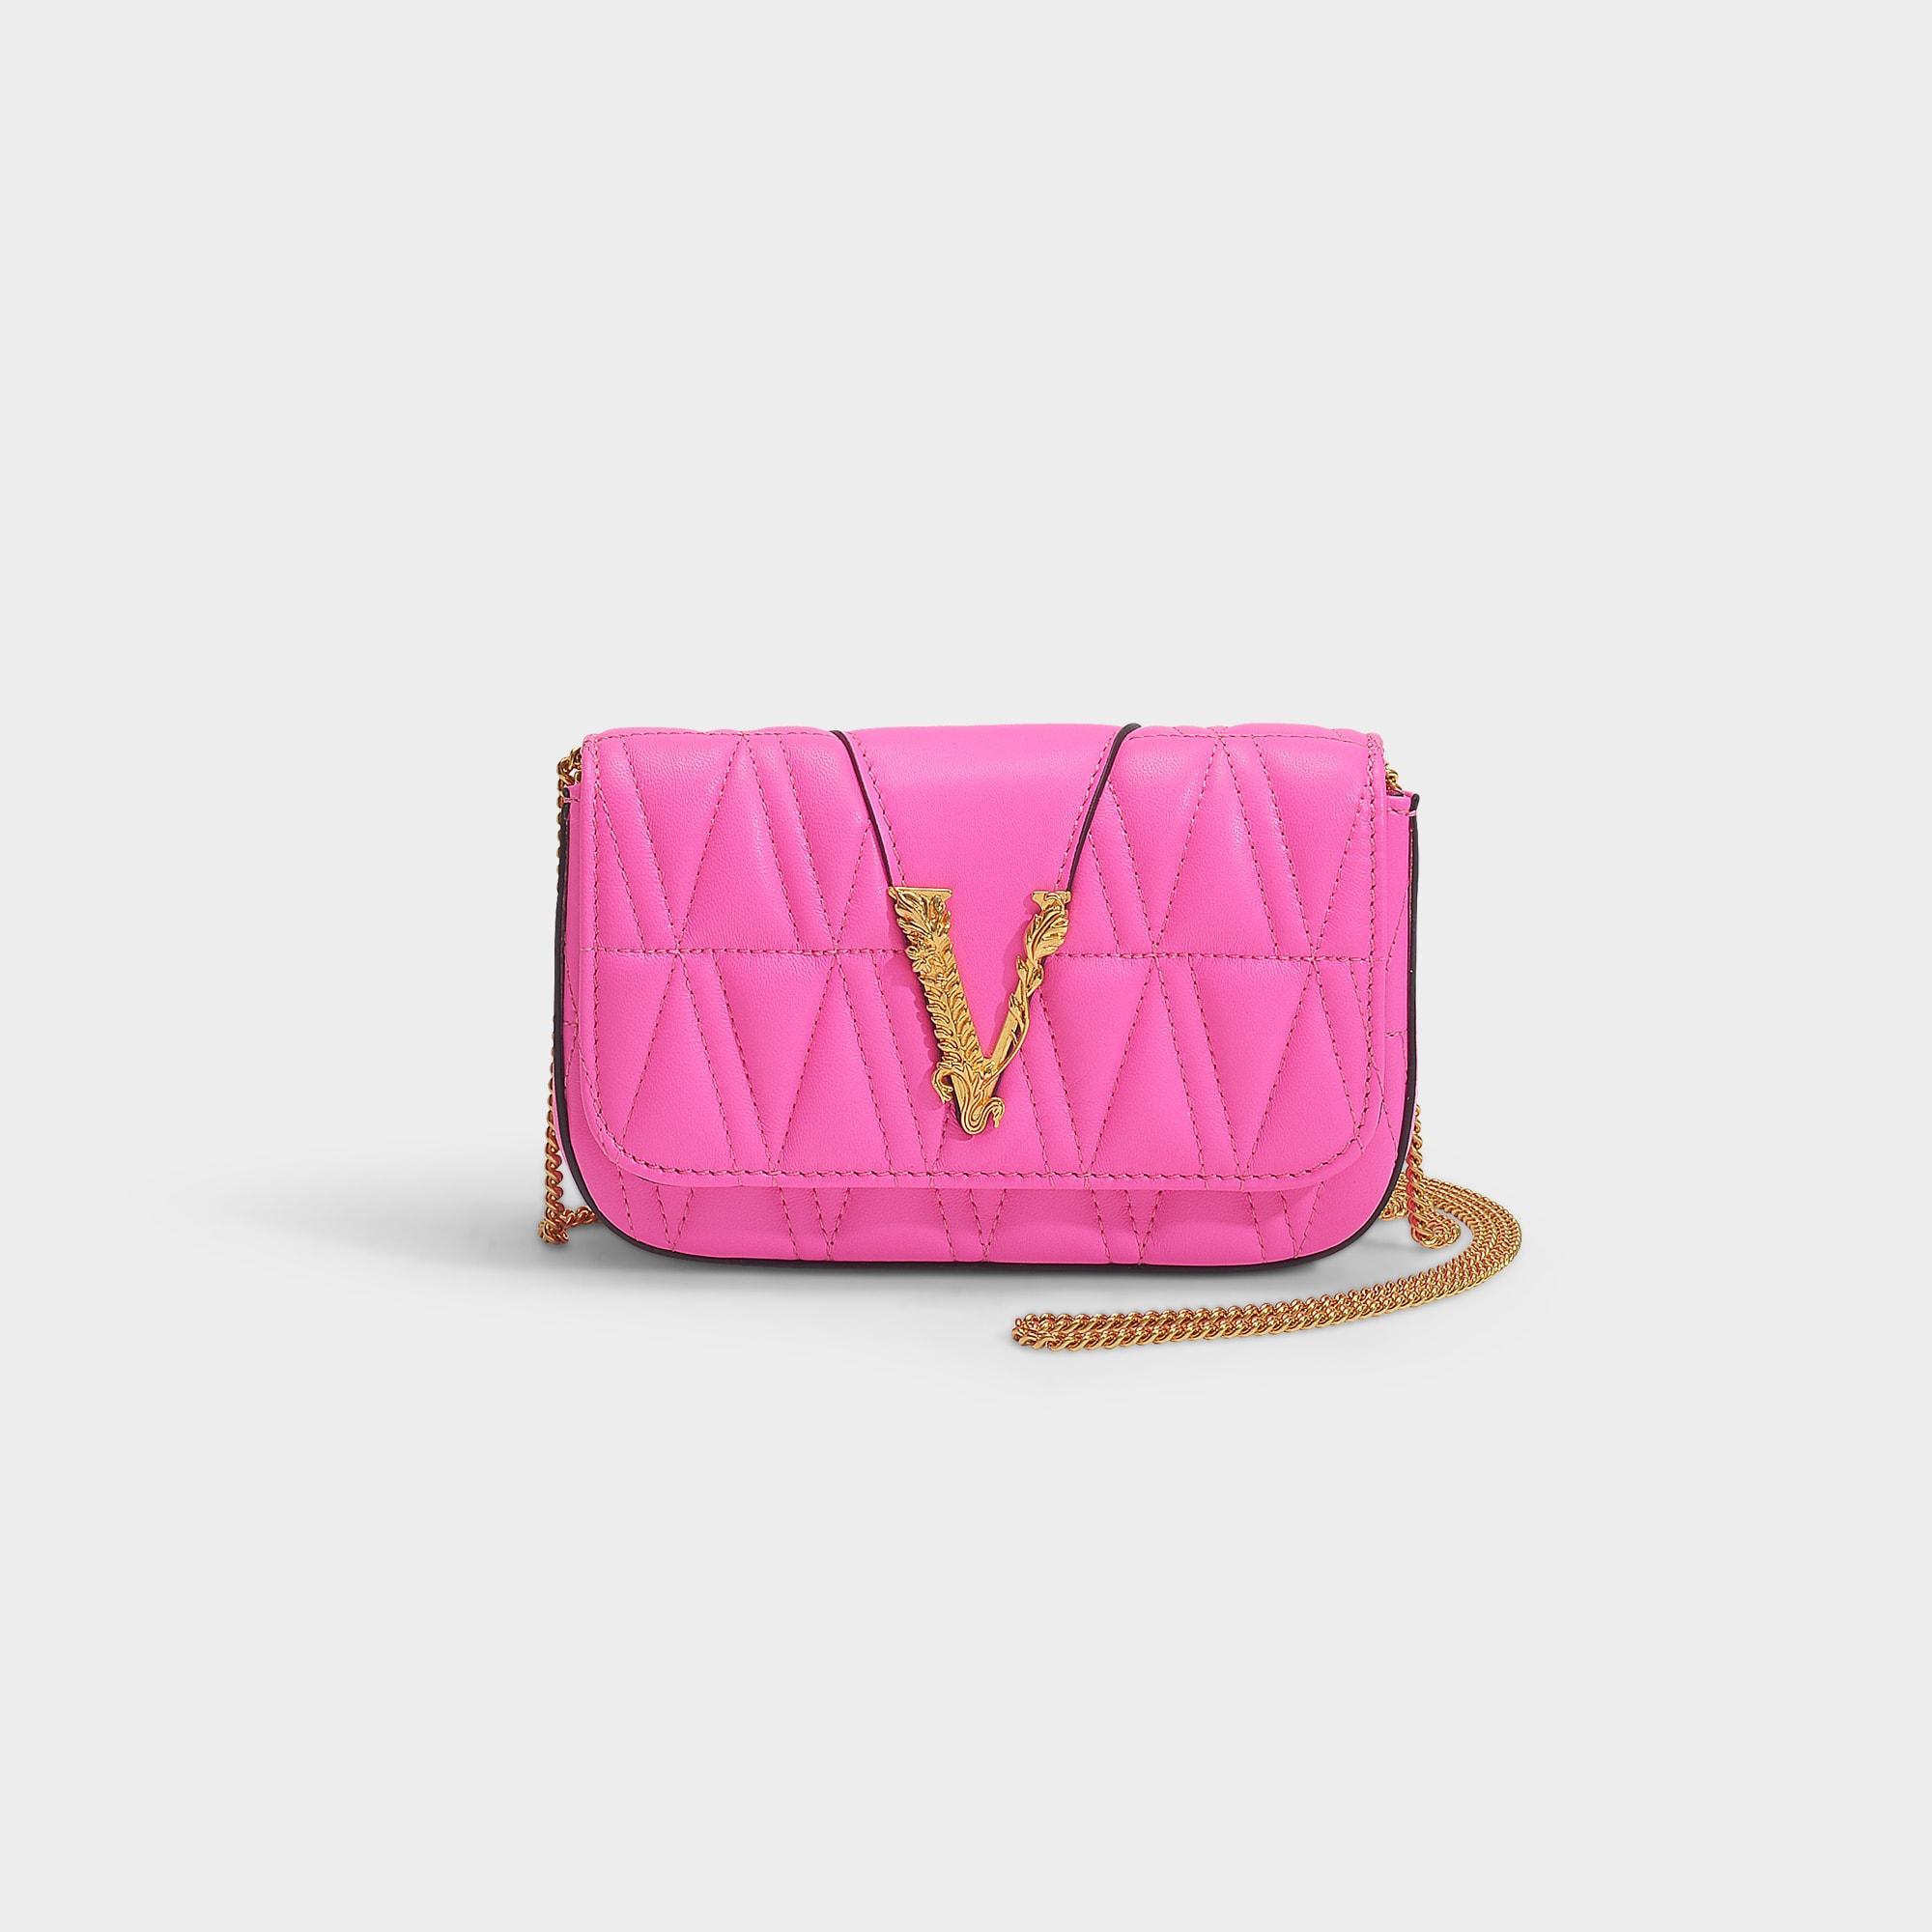 Versace V Baguette Bag In Fuchsia Quilted Leather in Pink - Lyst